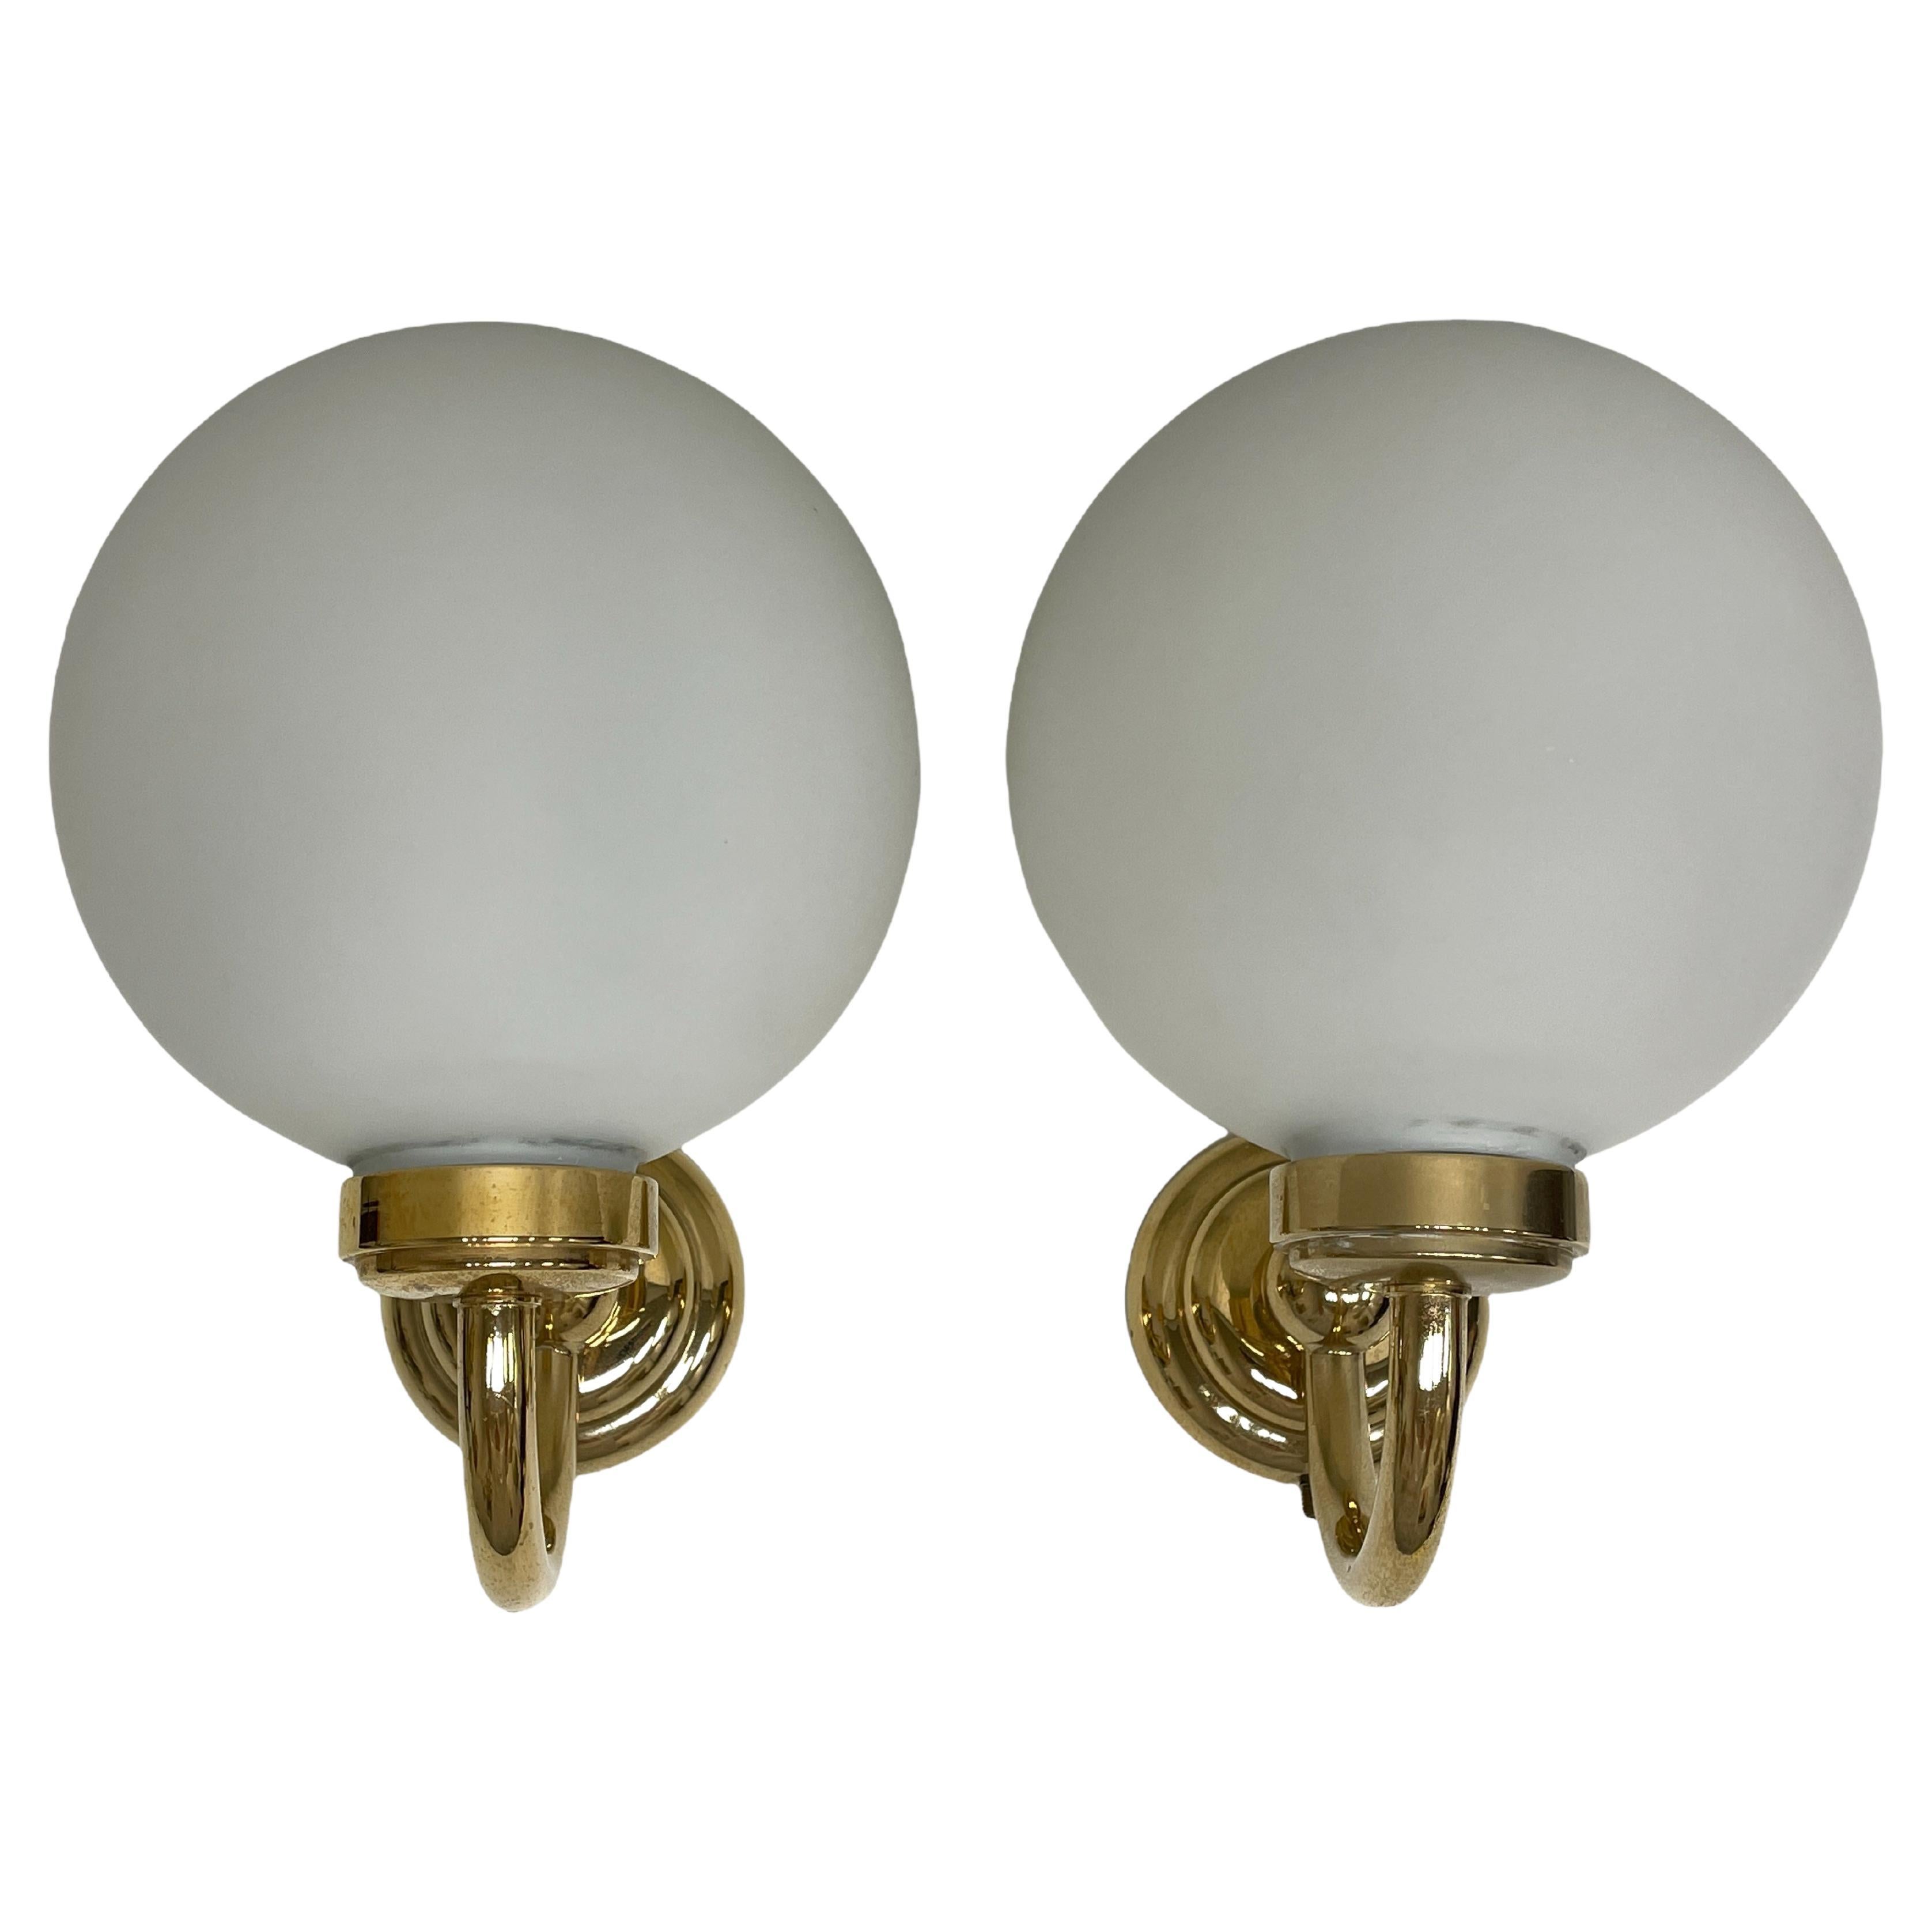 Pair of Art Deco Style Brass and Milk Glass Sconces, Germany